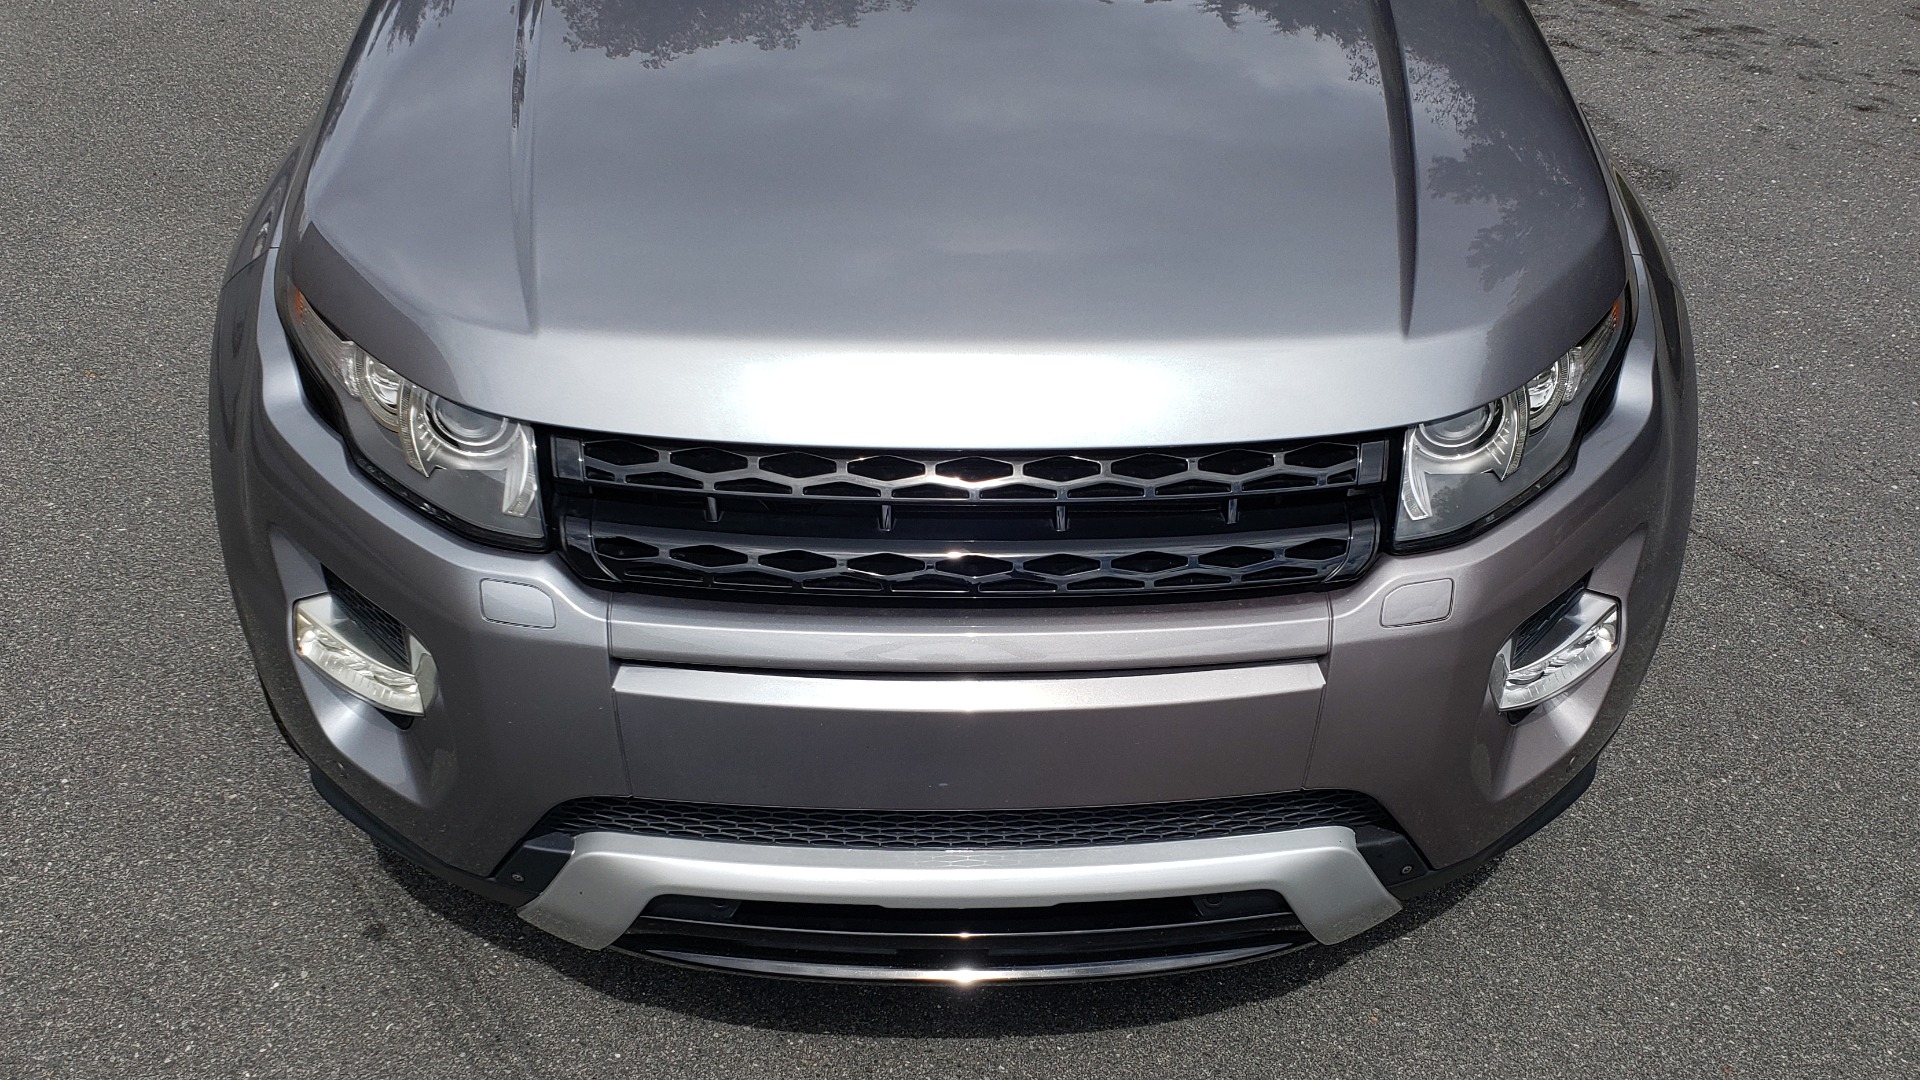 Used 2013 Land Rover RANGE ROVER EVOQUE DYNAMIC PREMIUM / NAV / PANO-ROOF / BLIND SPOT / REARVIEW for sale Sold at Formula Imports in Charlotte NC 28227 31